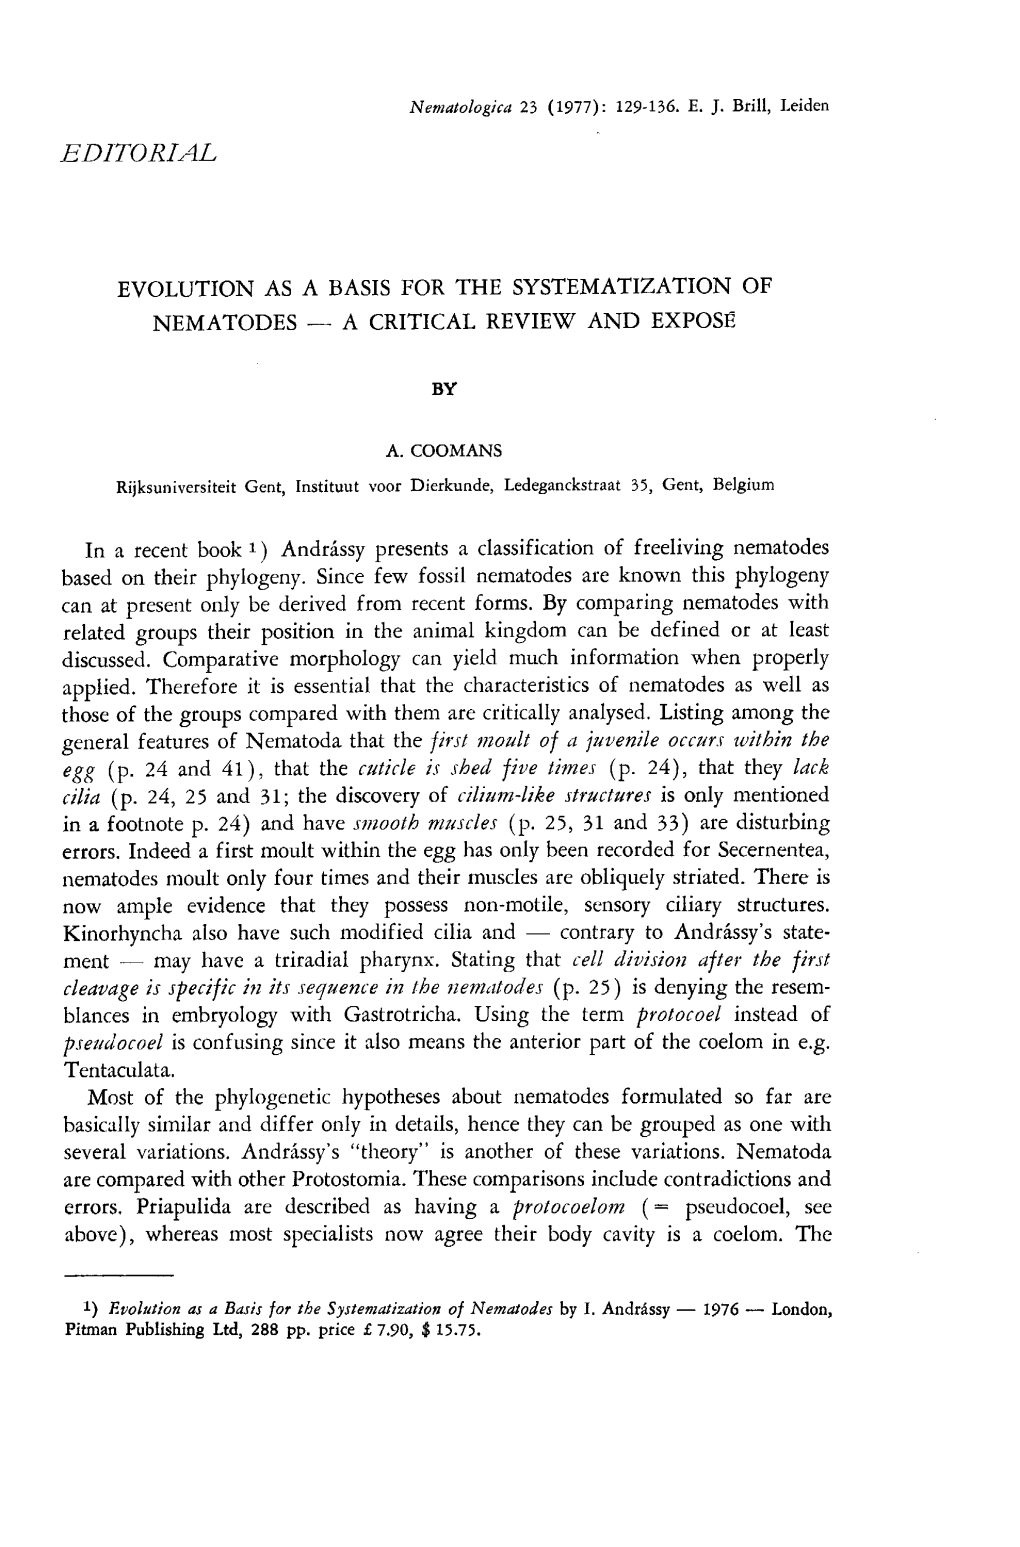 Evolution As a Basis for the Systematization of Nematodes - a Critical Review and Expose